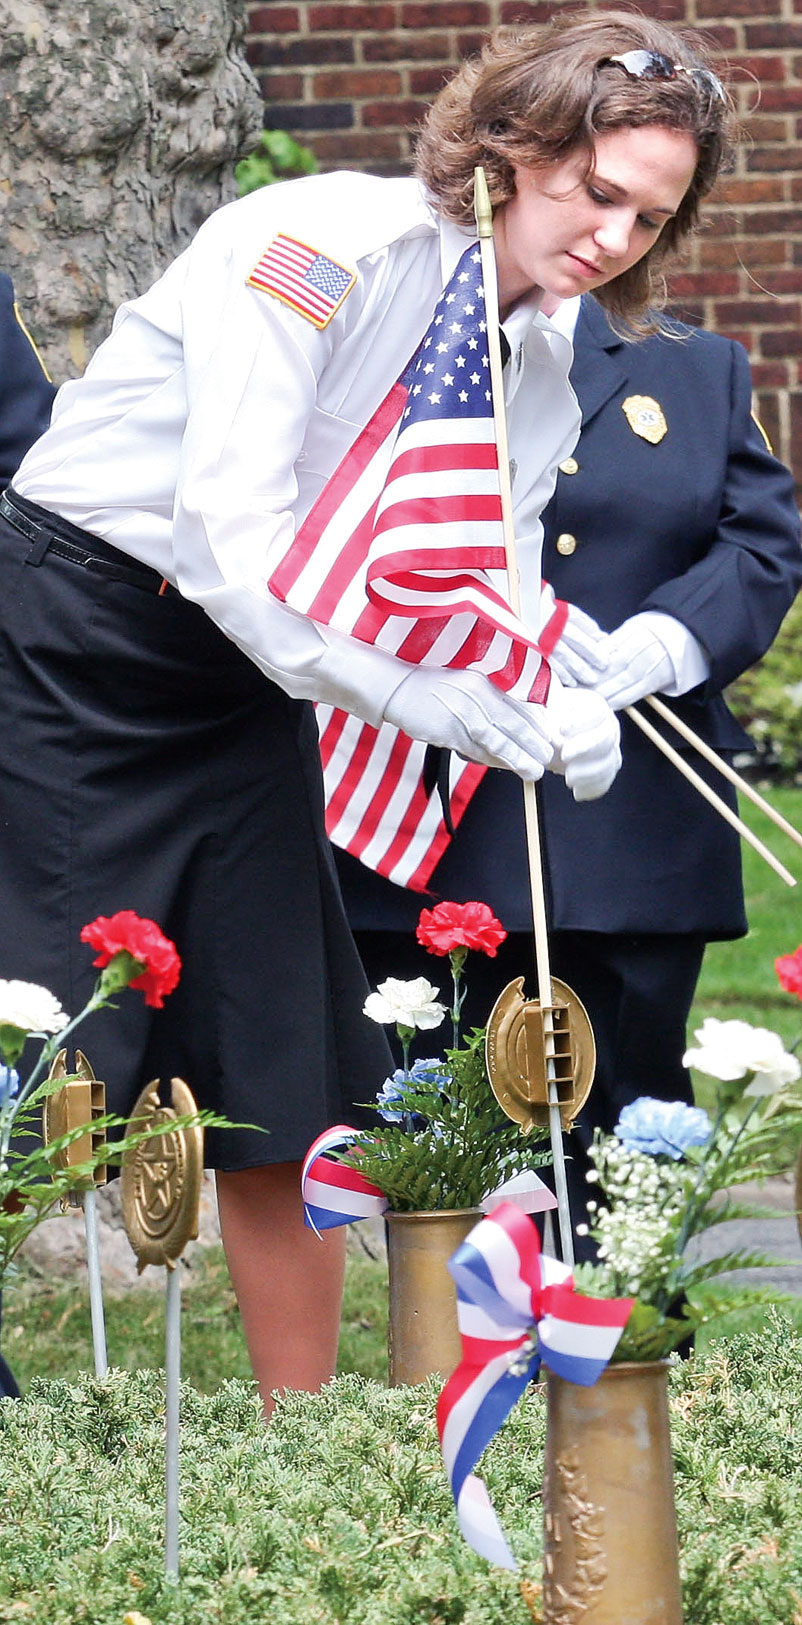 Firefighter/EMT Lee Ann Setser places a flag during the Memorial Day services Sunday afternoon in McDonald.